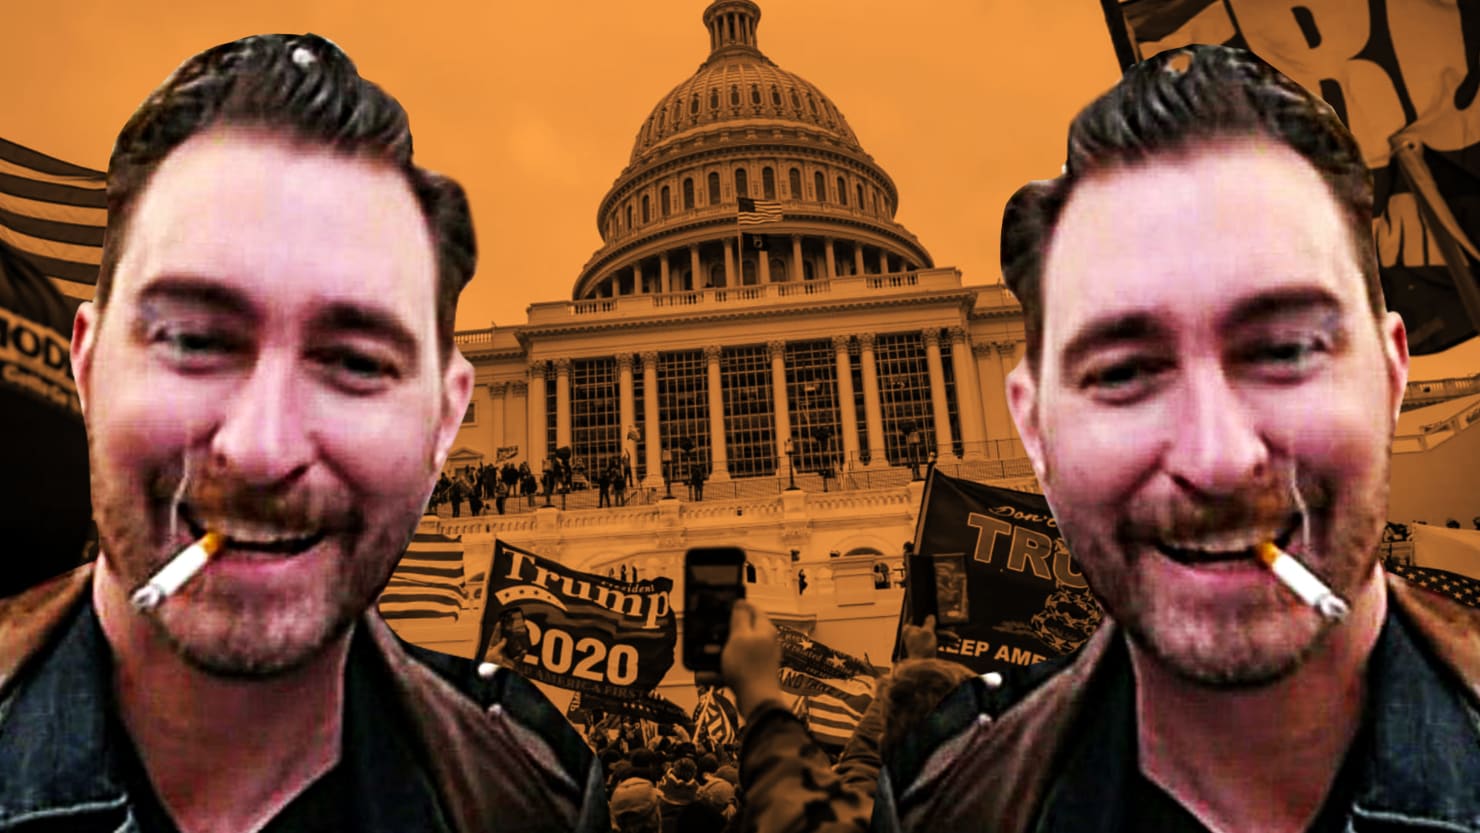 Hawaii Proud Boy and ‘Murder the Media’ leader Nick Ochs arrested in a Capitol riot